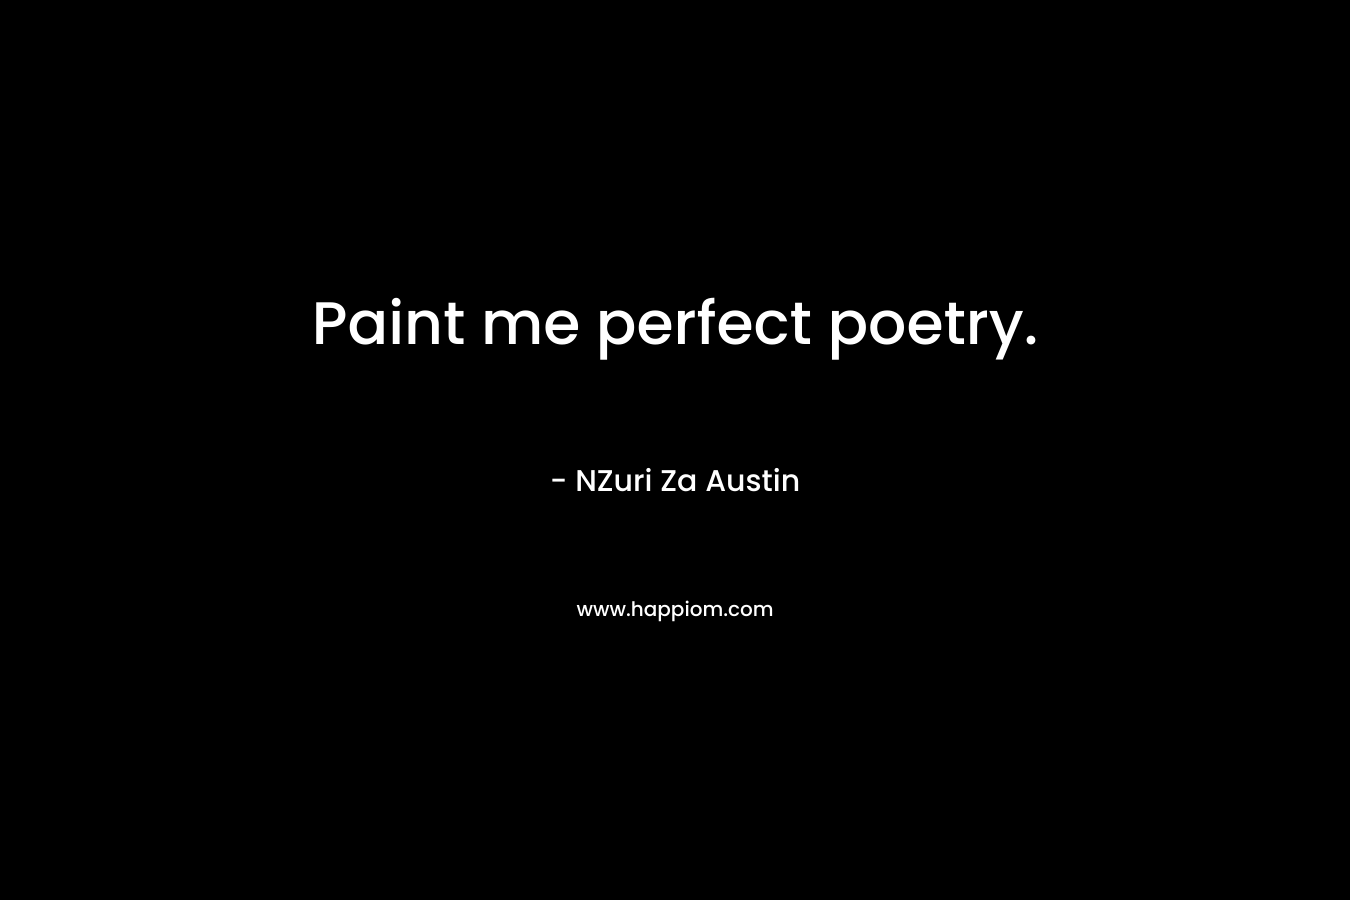 Paint me perfect poetry.